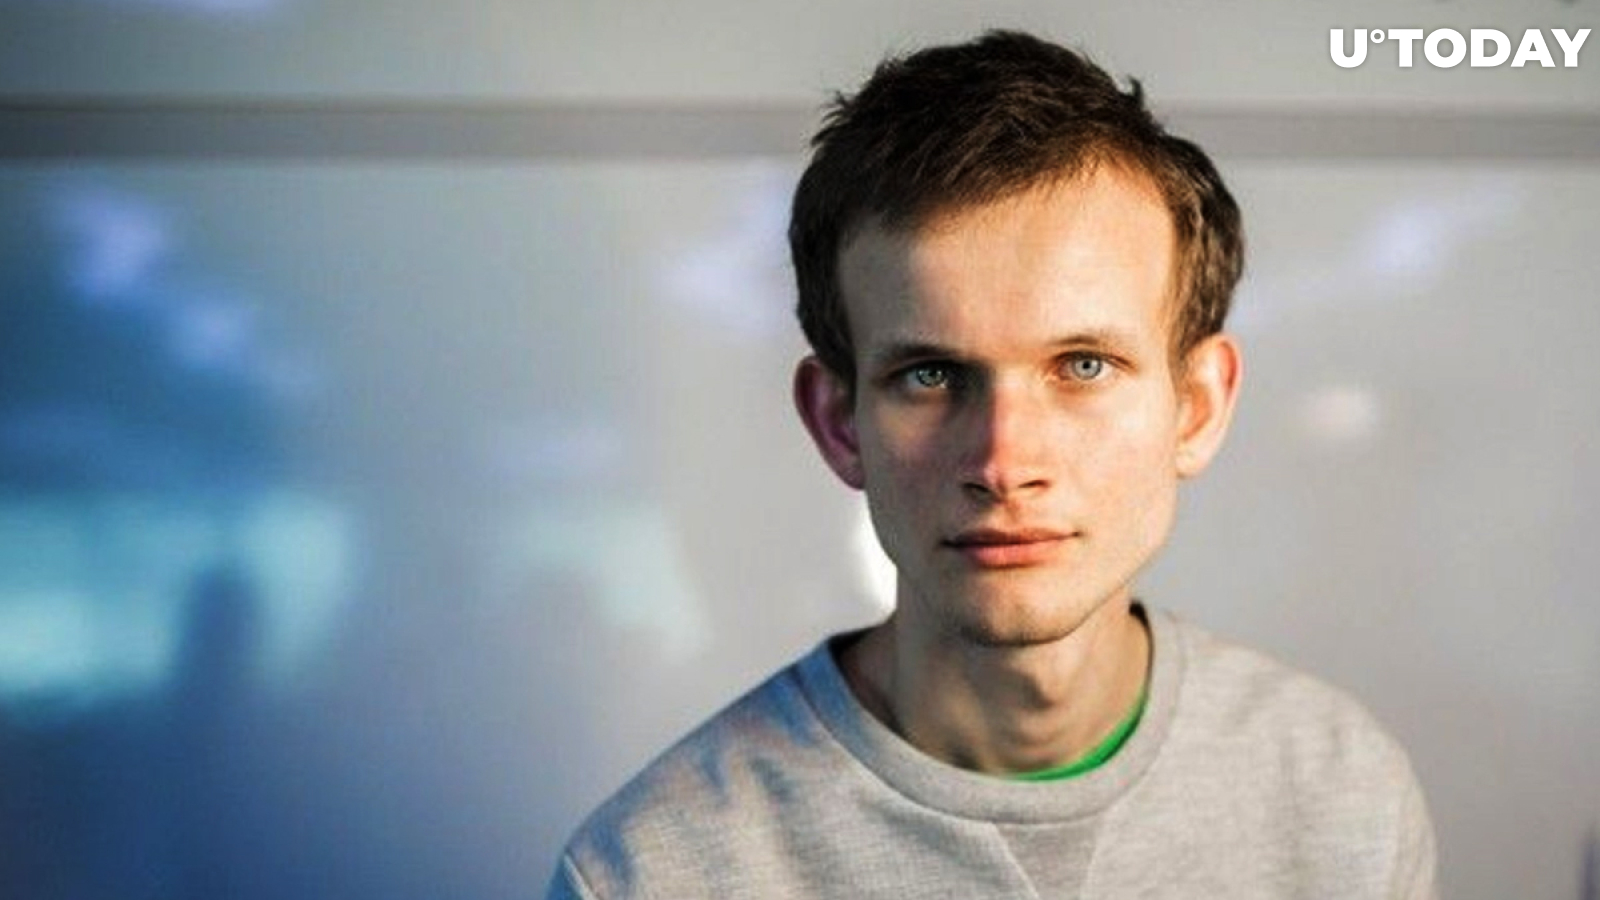 Vitalik Buterin Suggests Building "Our Own App Store," Now That Google Plans to Enforce Its IAP Billing for App Sellers